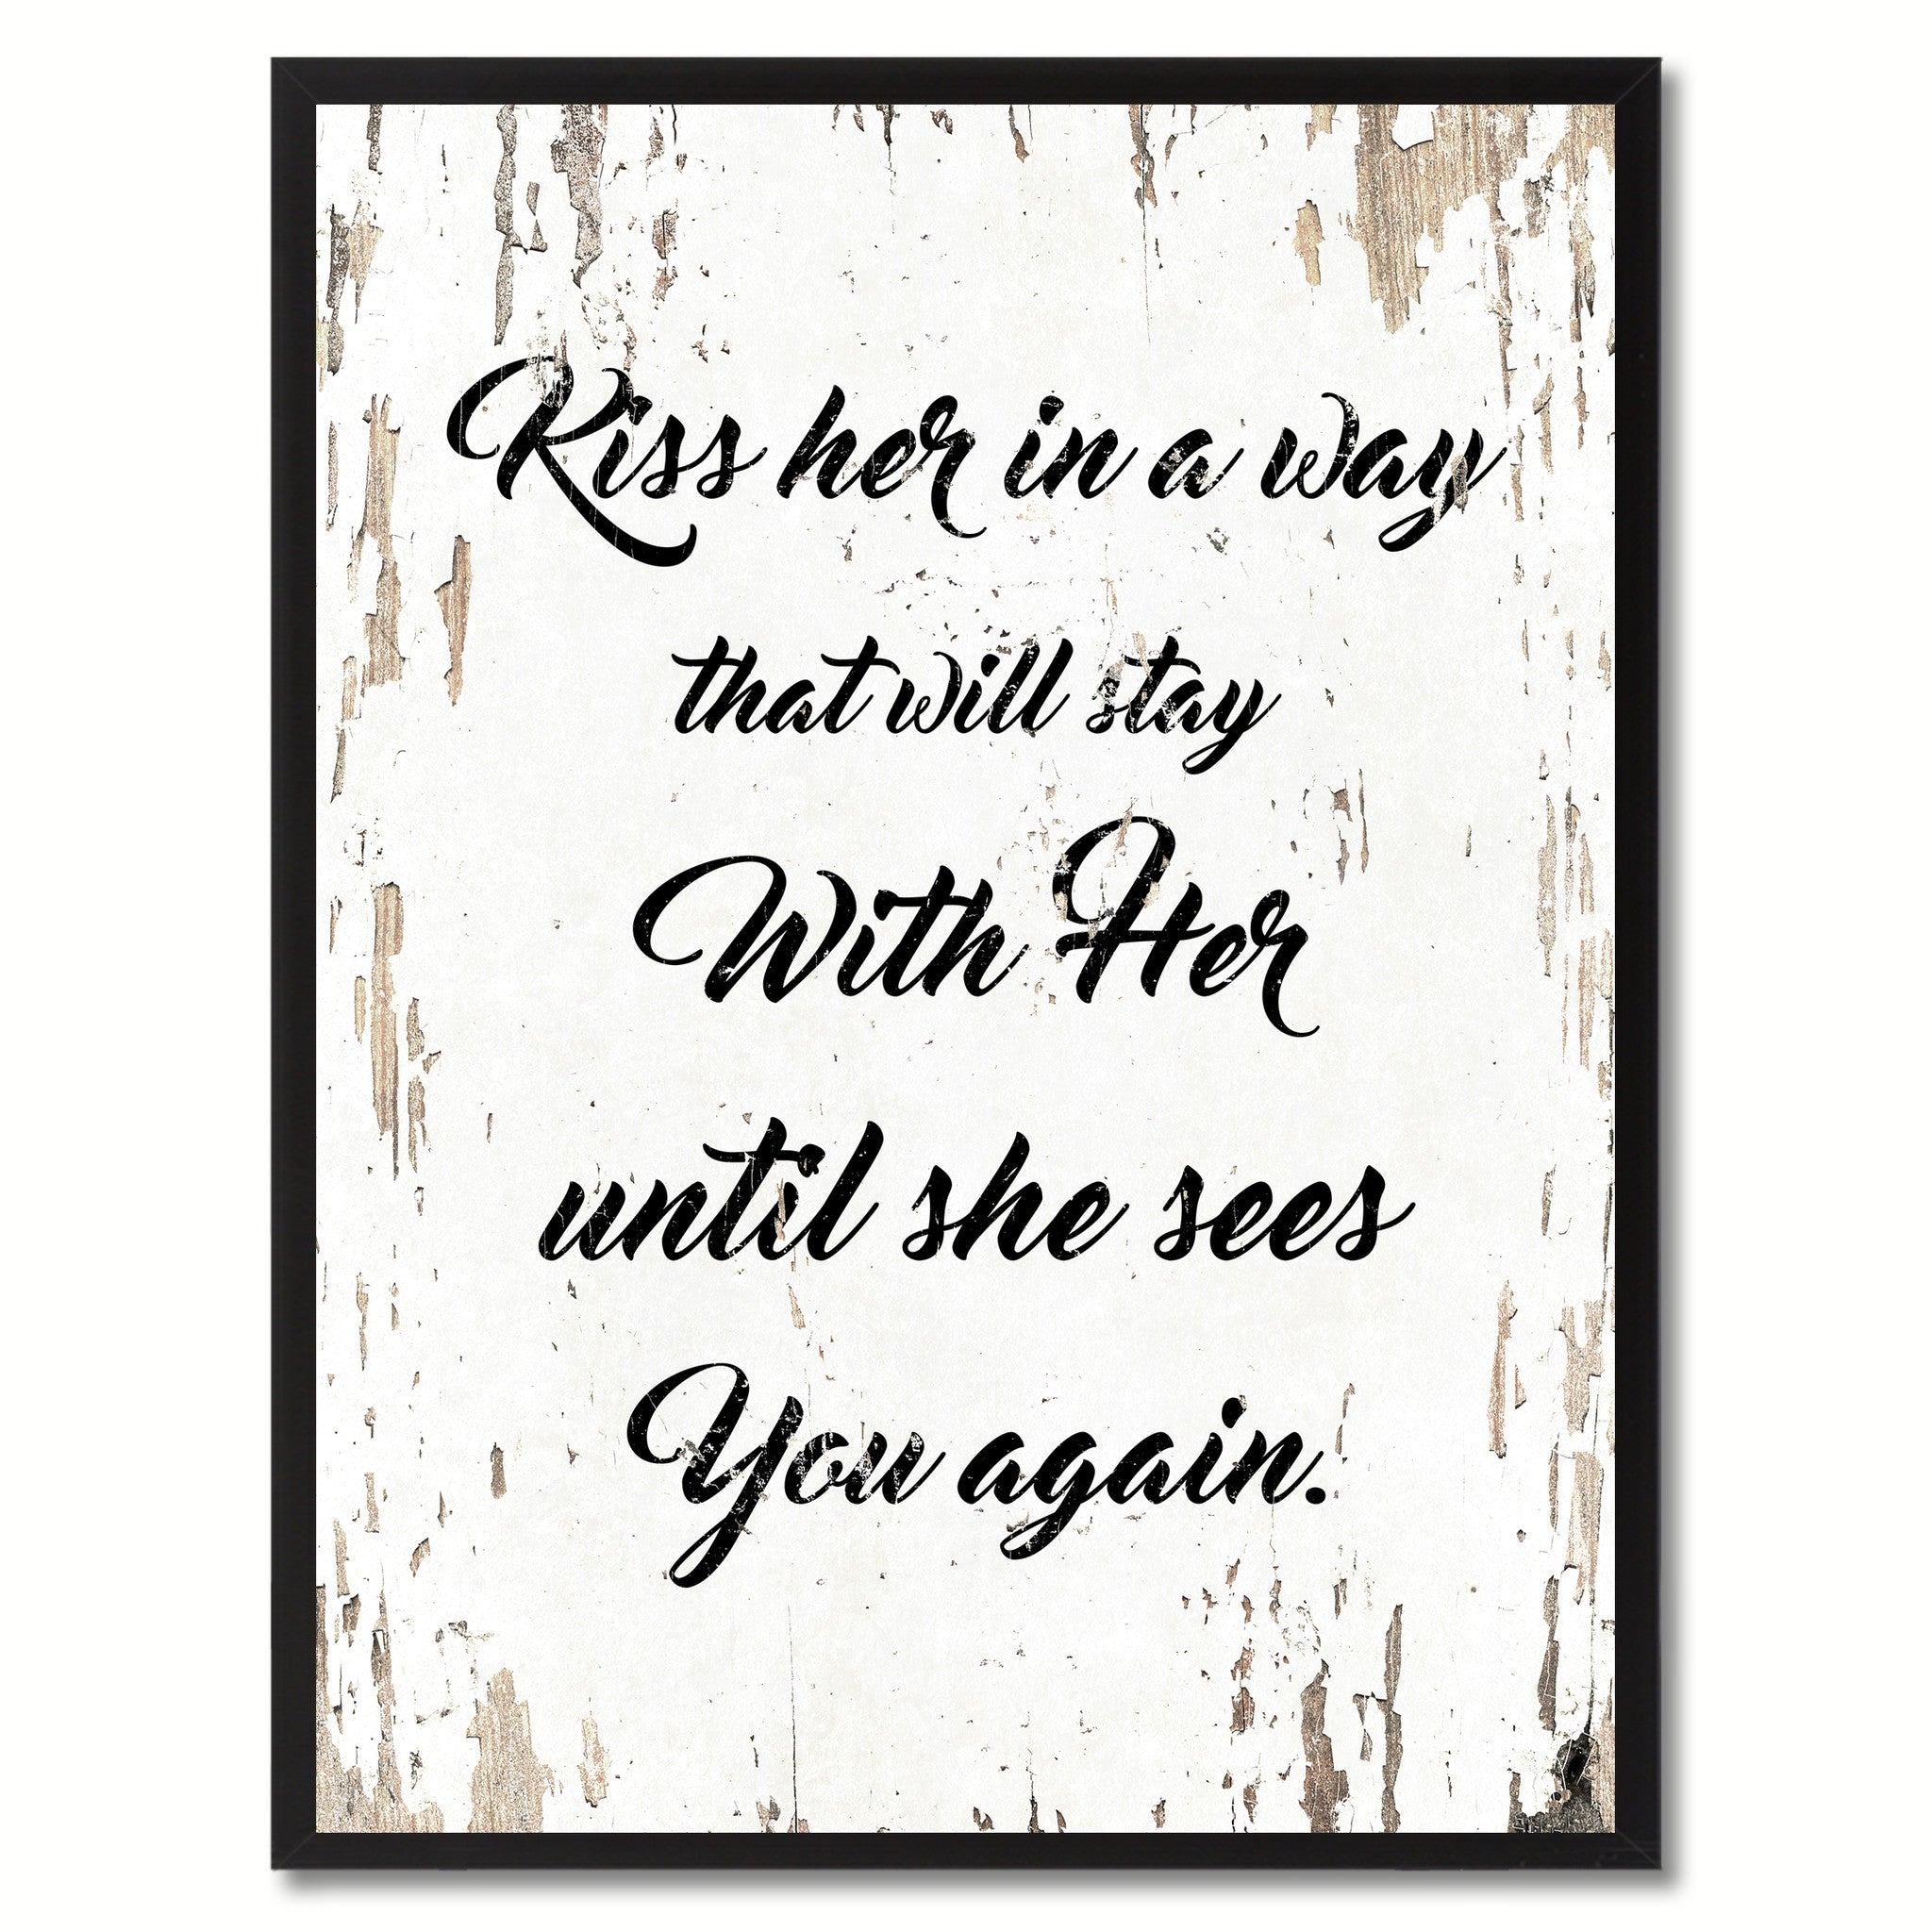 Kiss her in a way that will stay with her until she sees you again Happy Quote Saying Gift Ideas Home Decor Wall Art